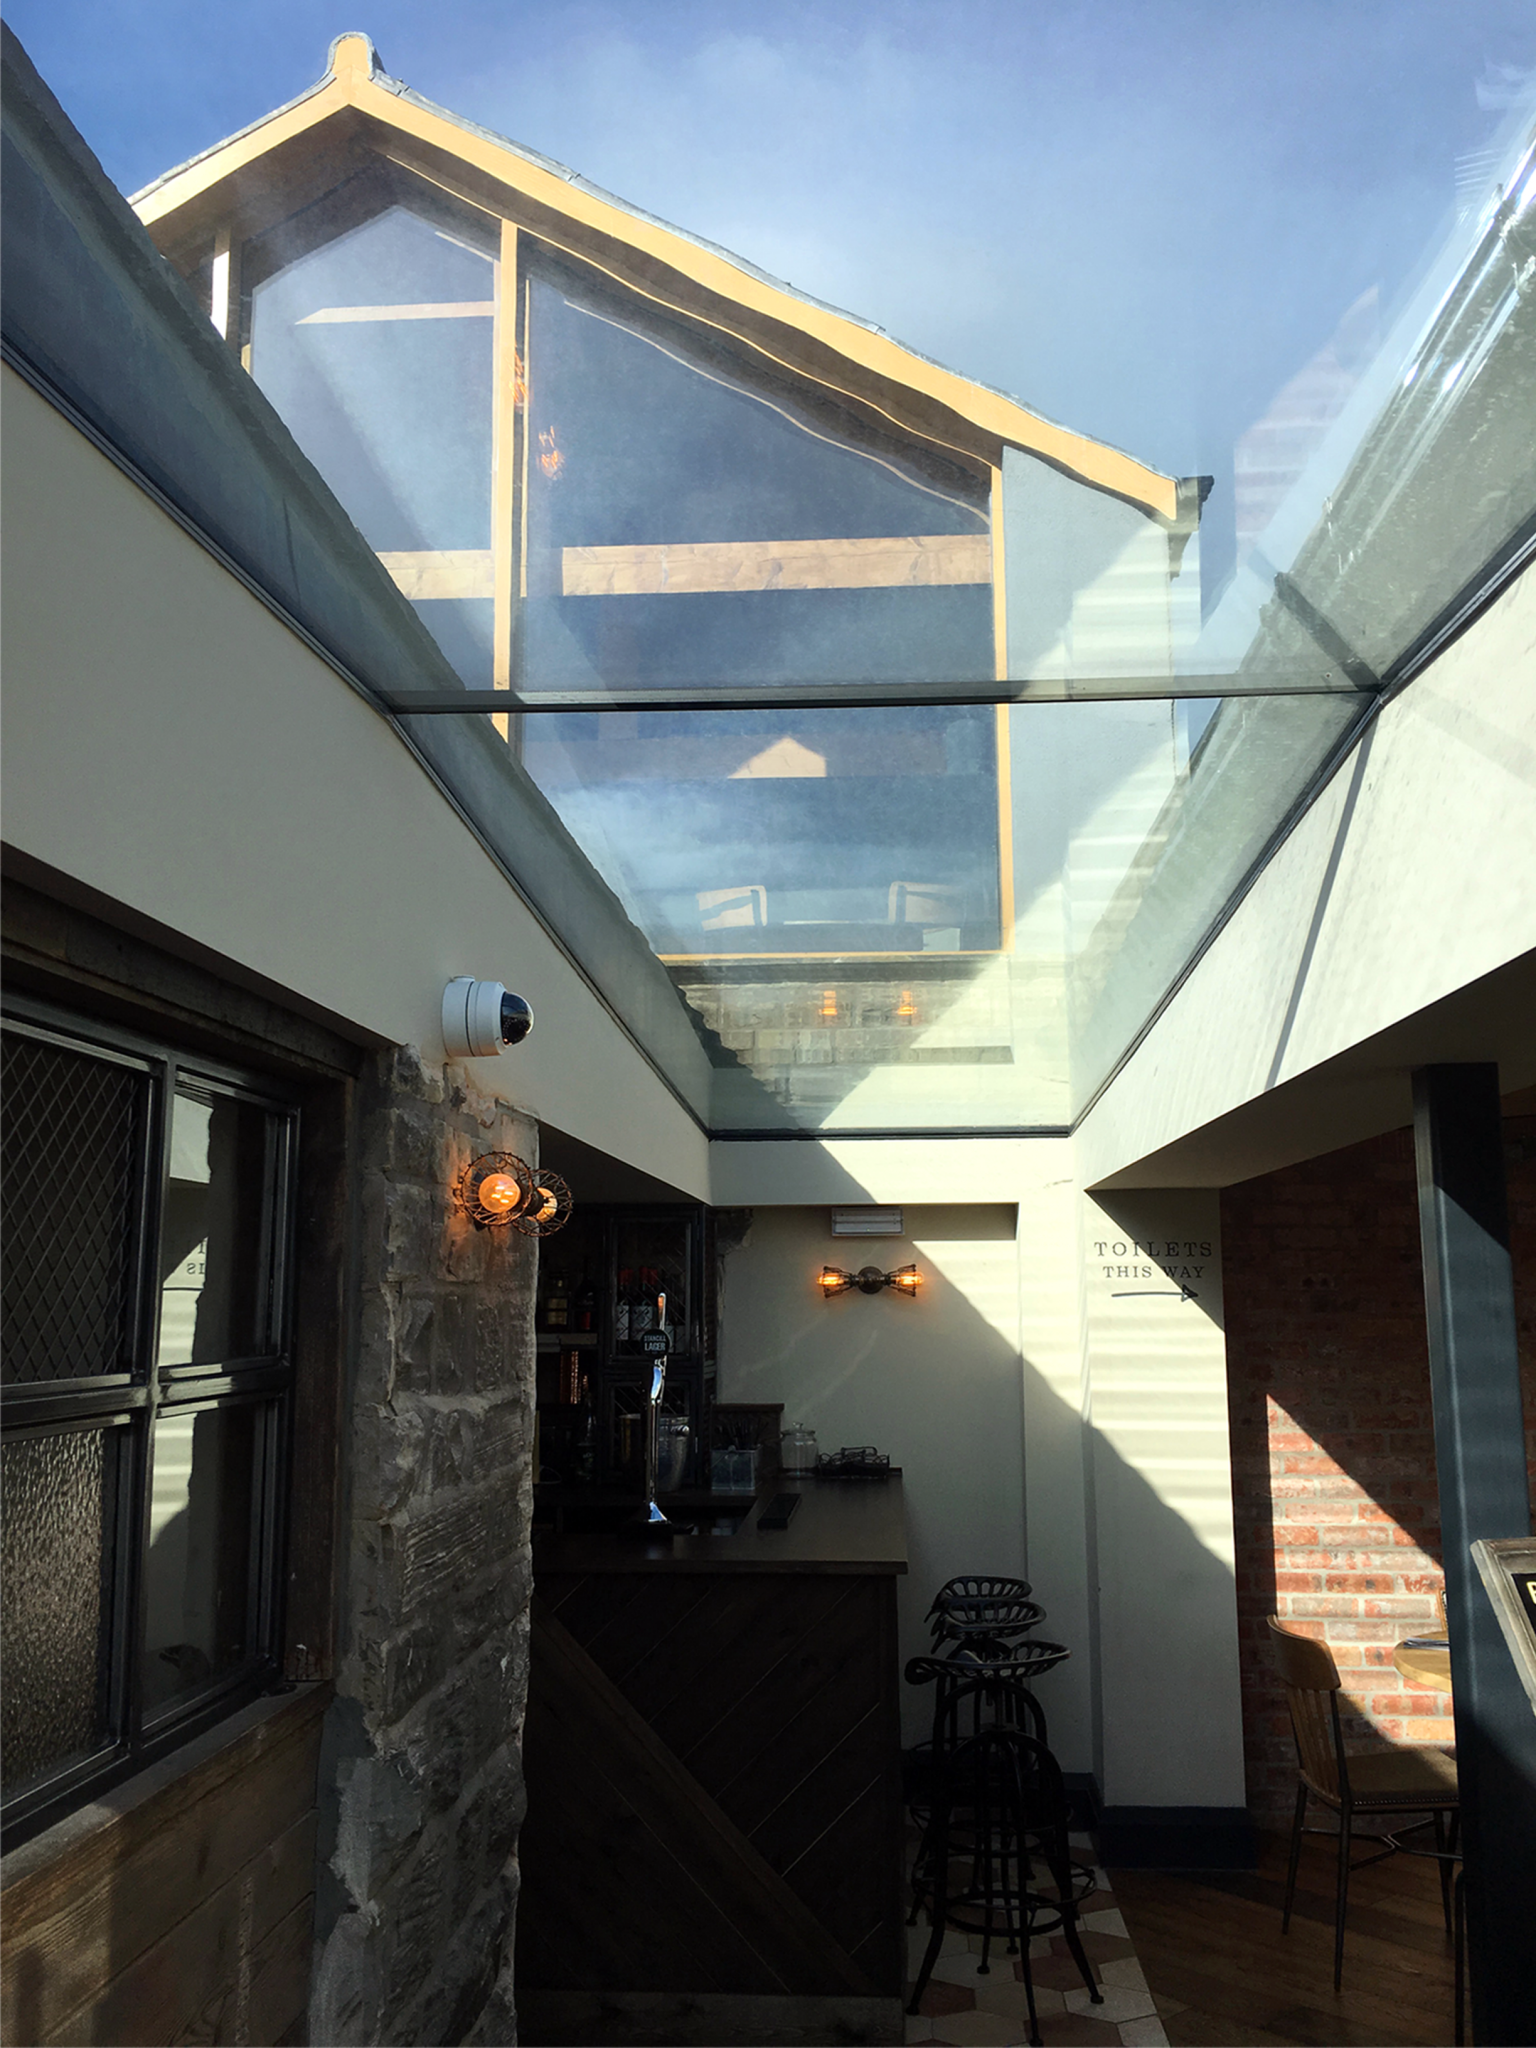 Clever glazing solution used to maximise daylight in Yorkshire café